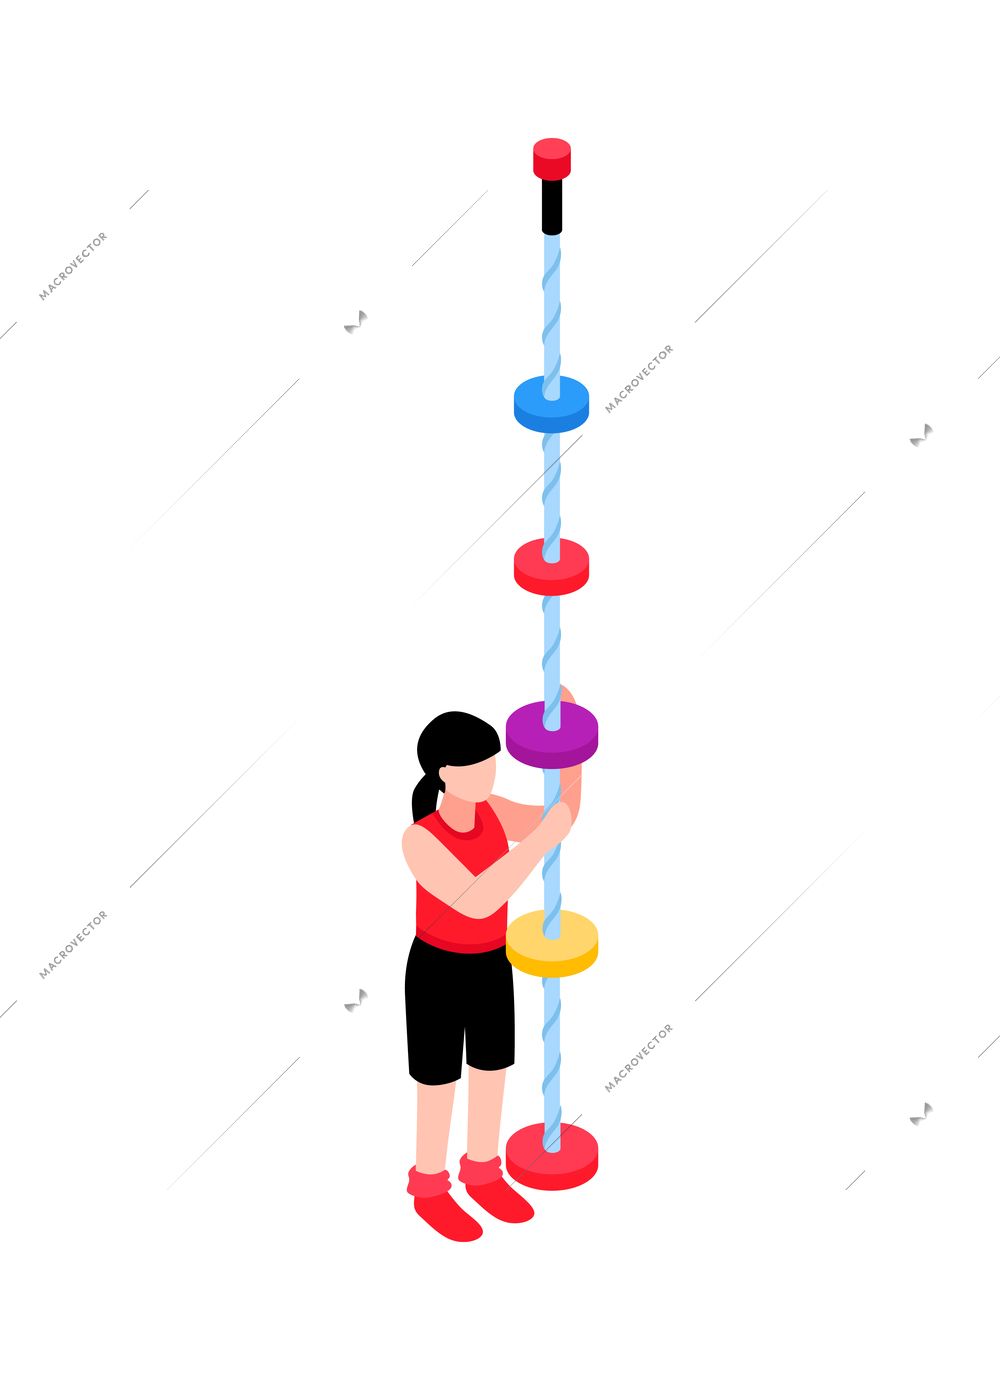 Isometric children sport equipment icon with girl climbing rope vector illustration